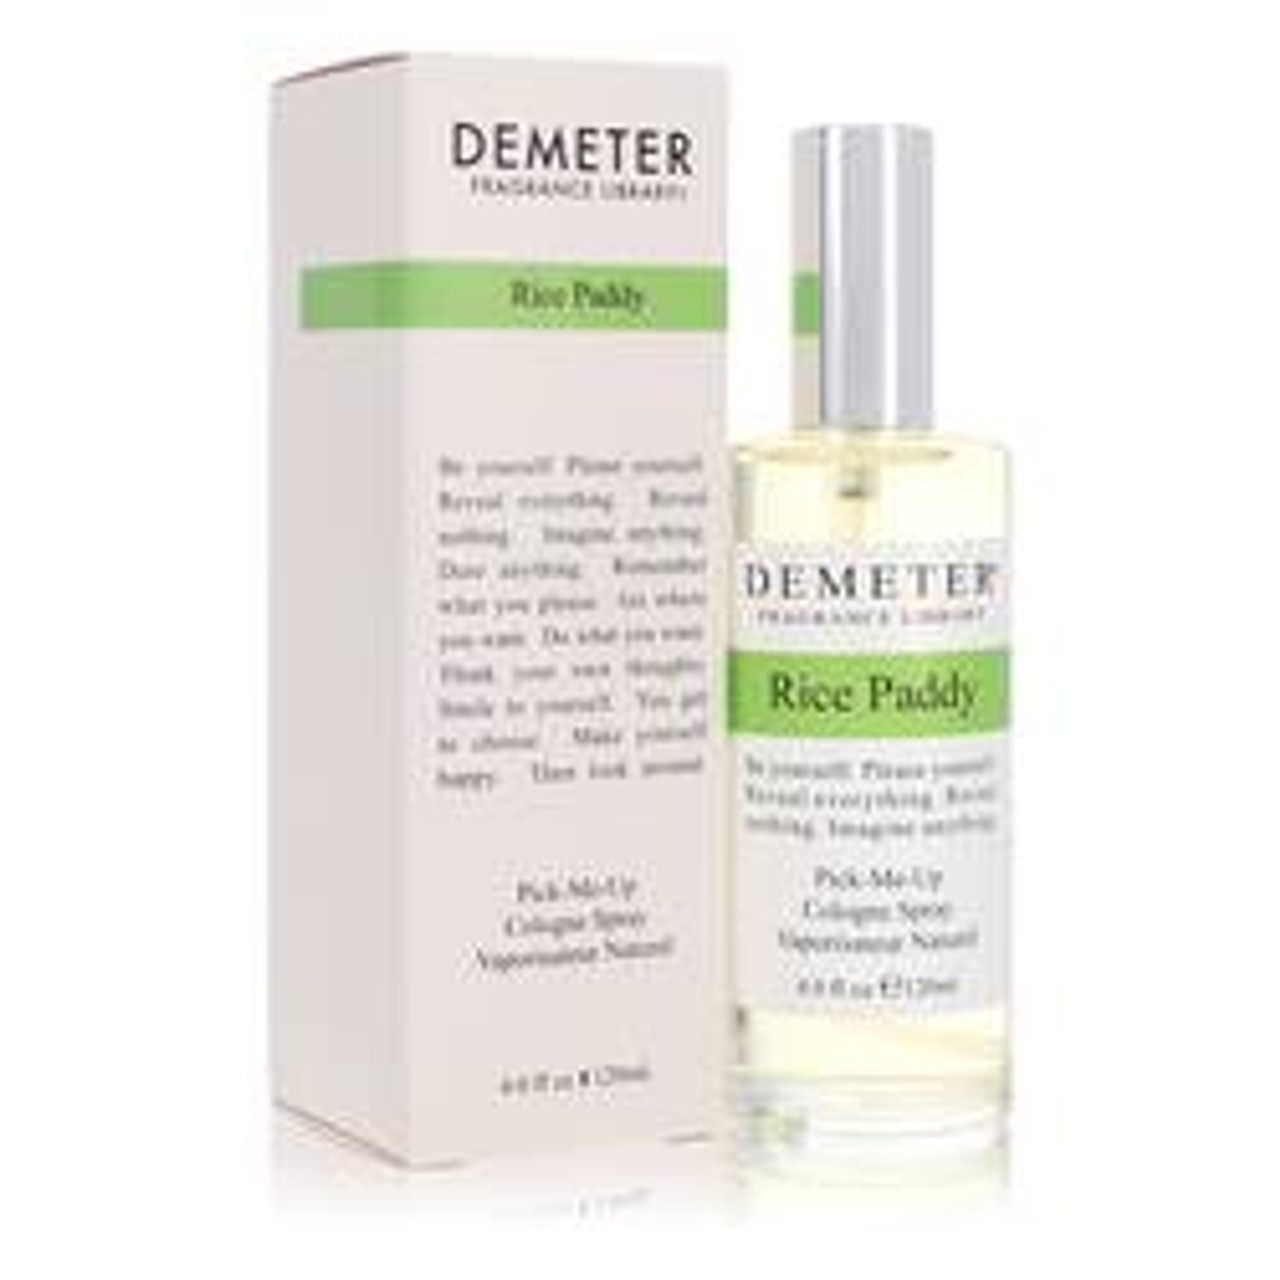 Demeter Rice Paddy Perfume By Demeter Cologne Spray 4 oz for Women - [From 79.50 - Choose pk Qty ] - *Ships from Miami